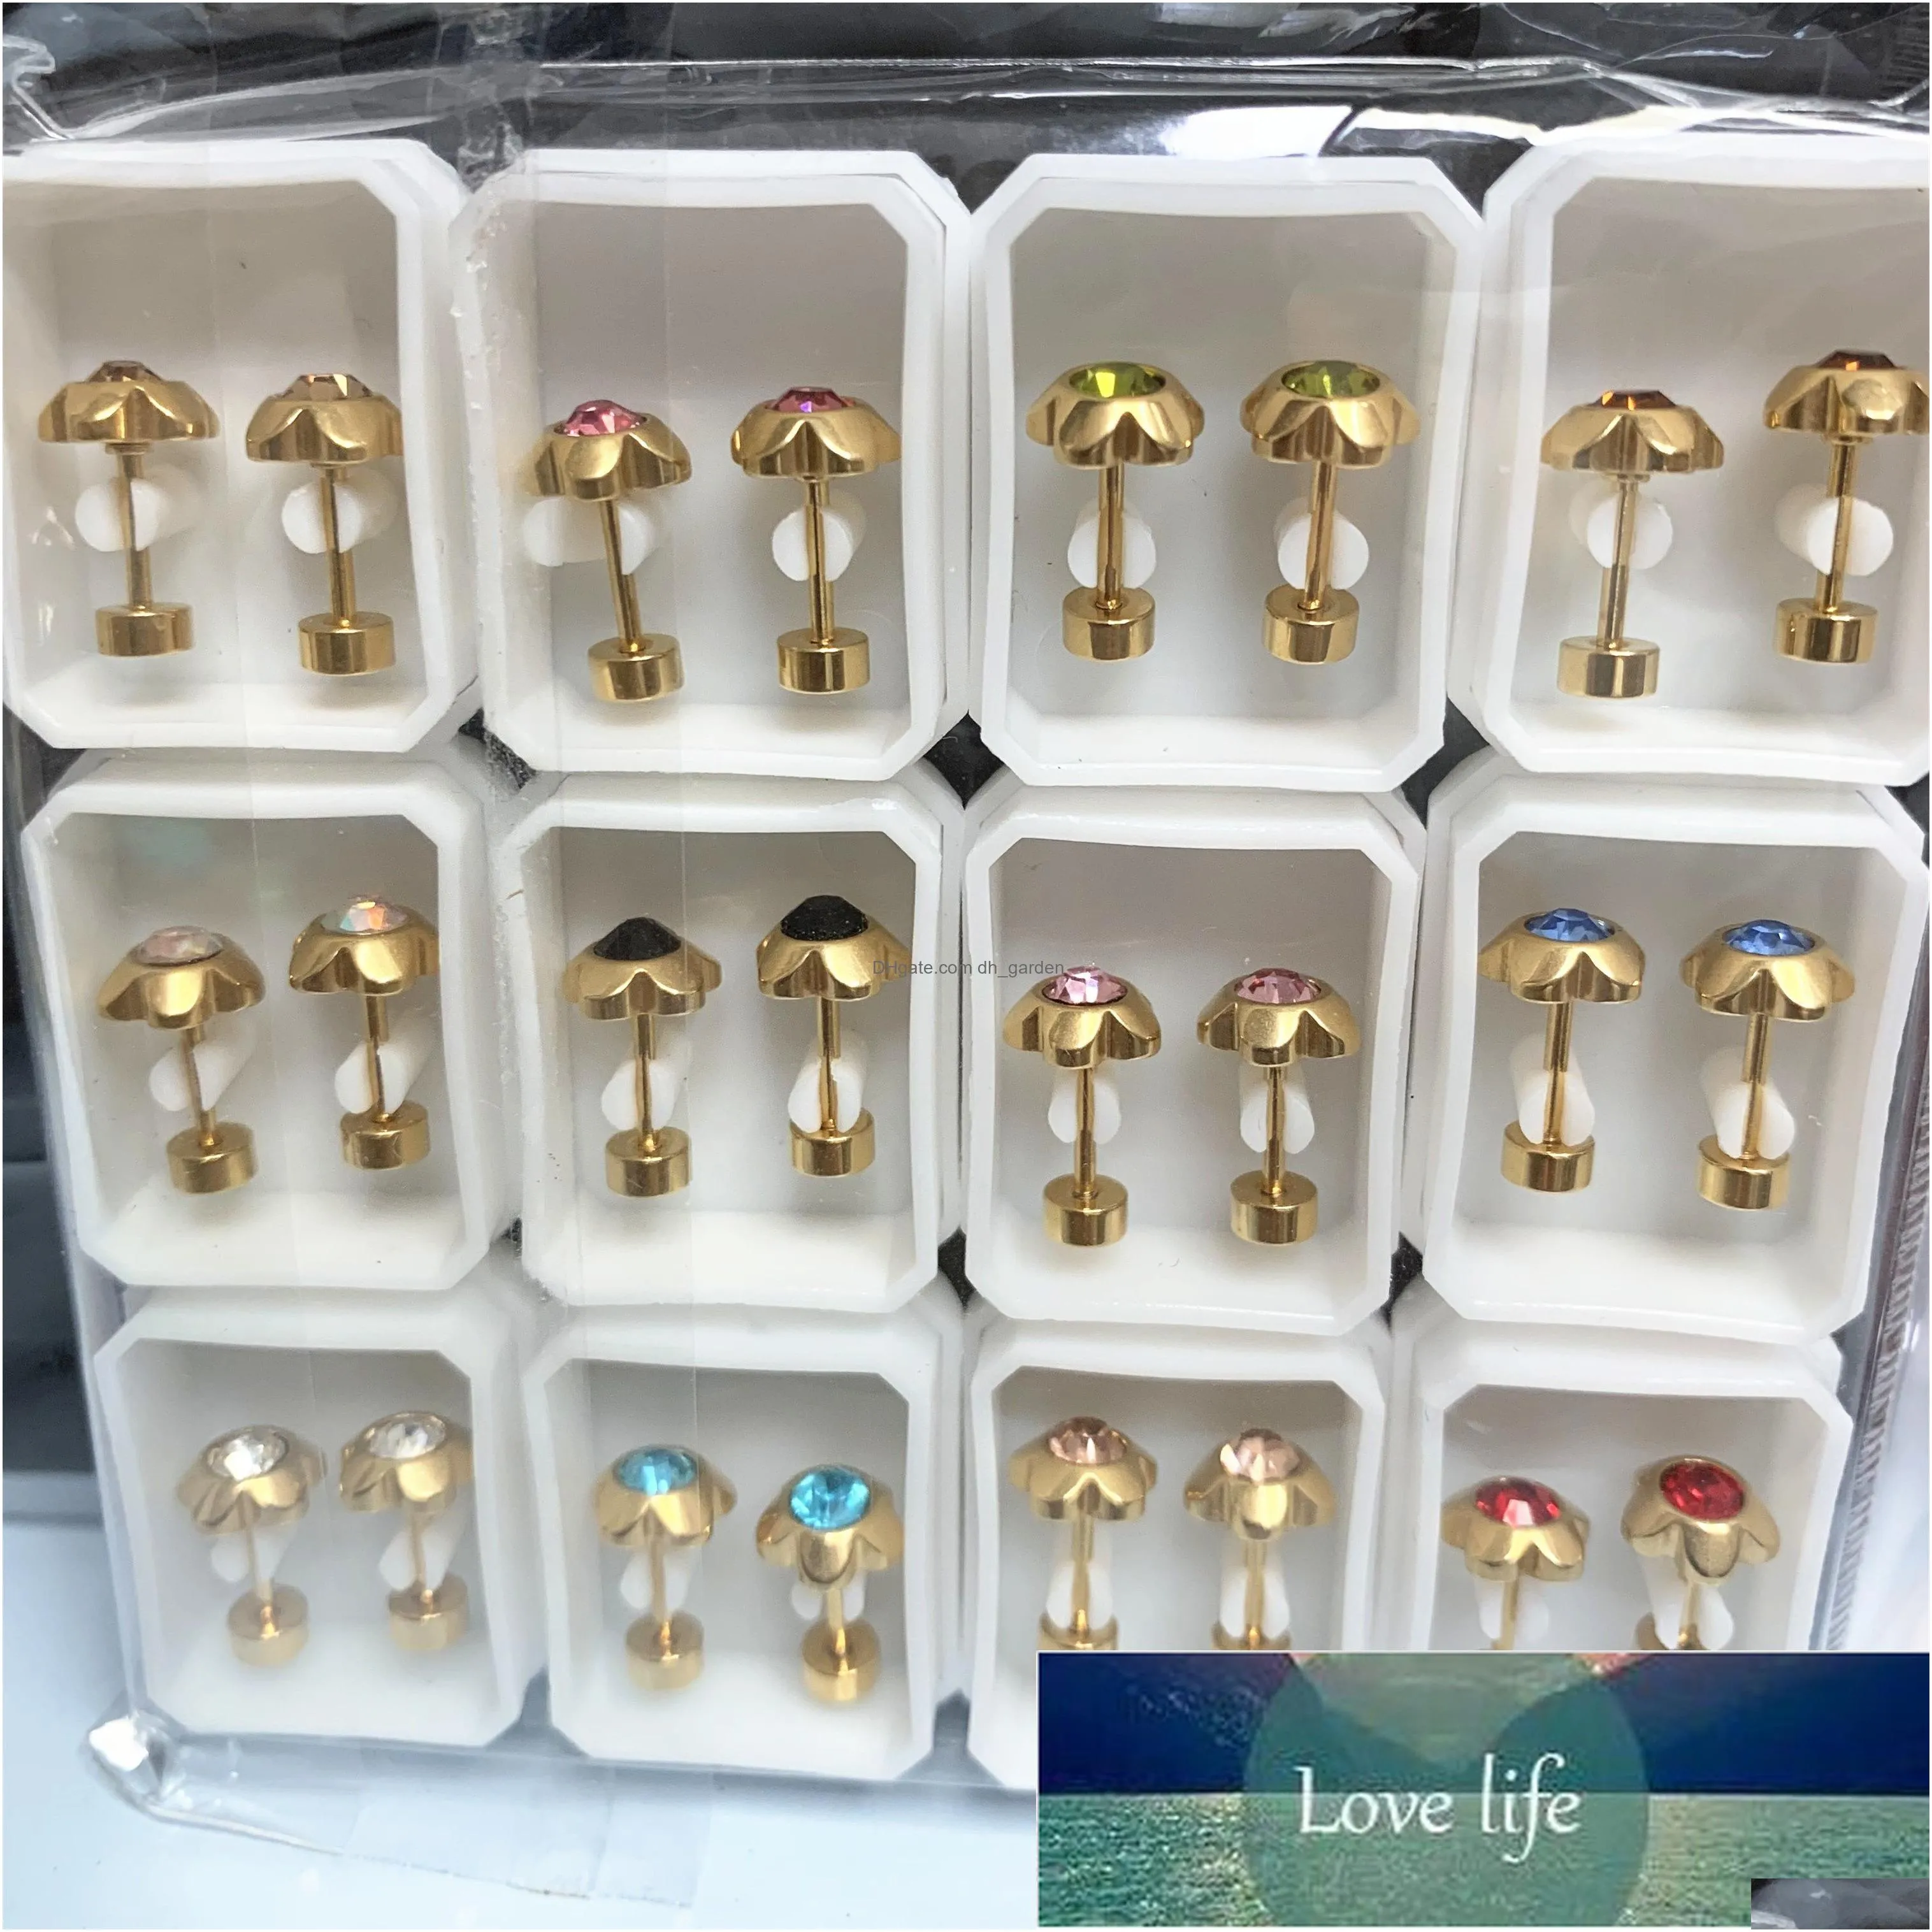 asonsteel 12pairs/lot gold/silver color colorful cubic zirconia flower screw stud earring stainless steel baby earring wholesale factory price expert